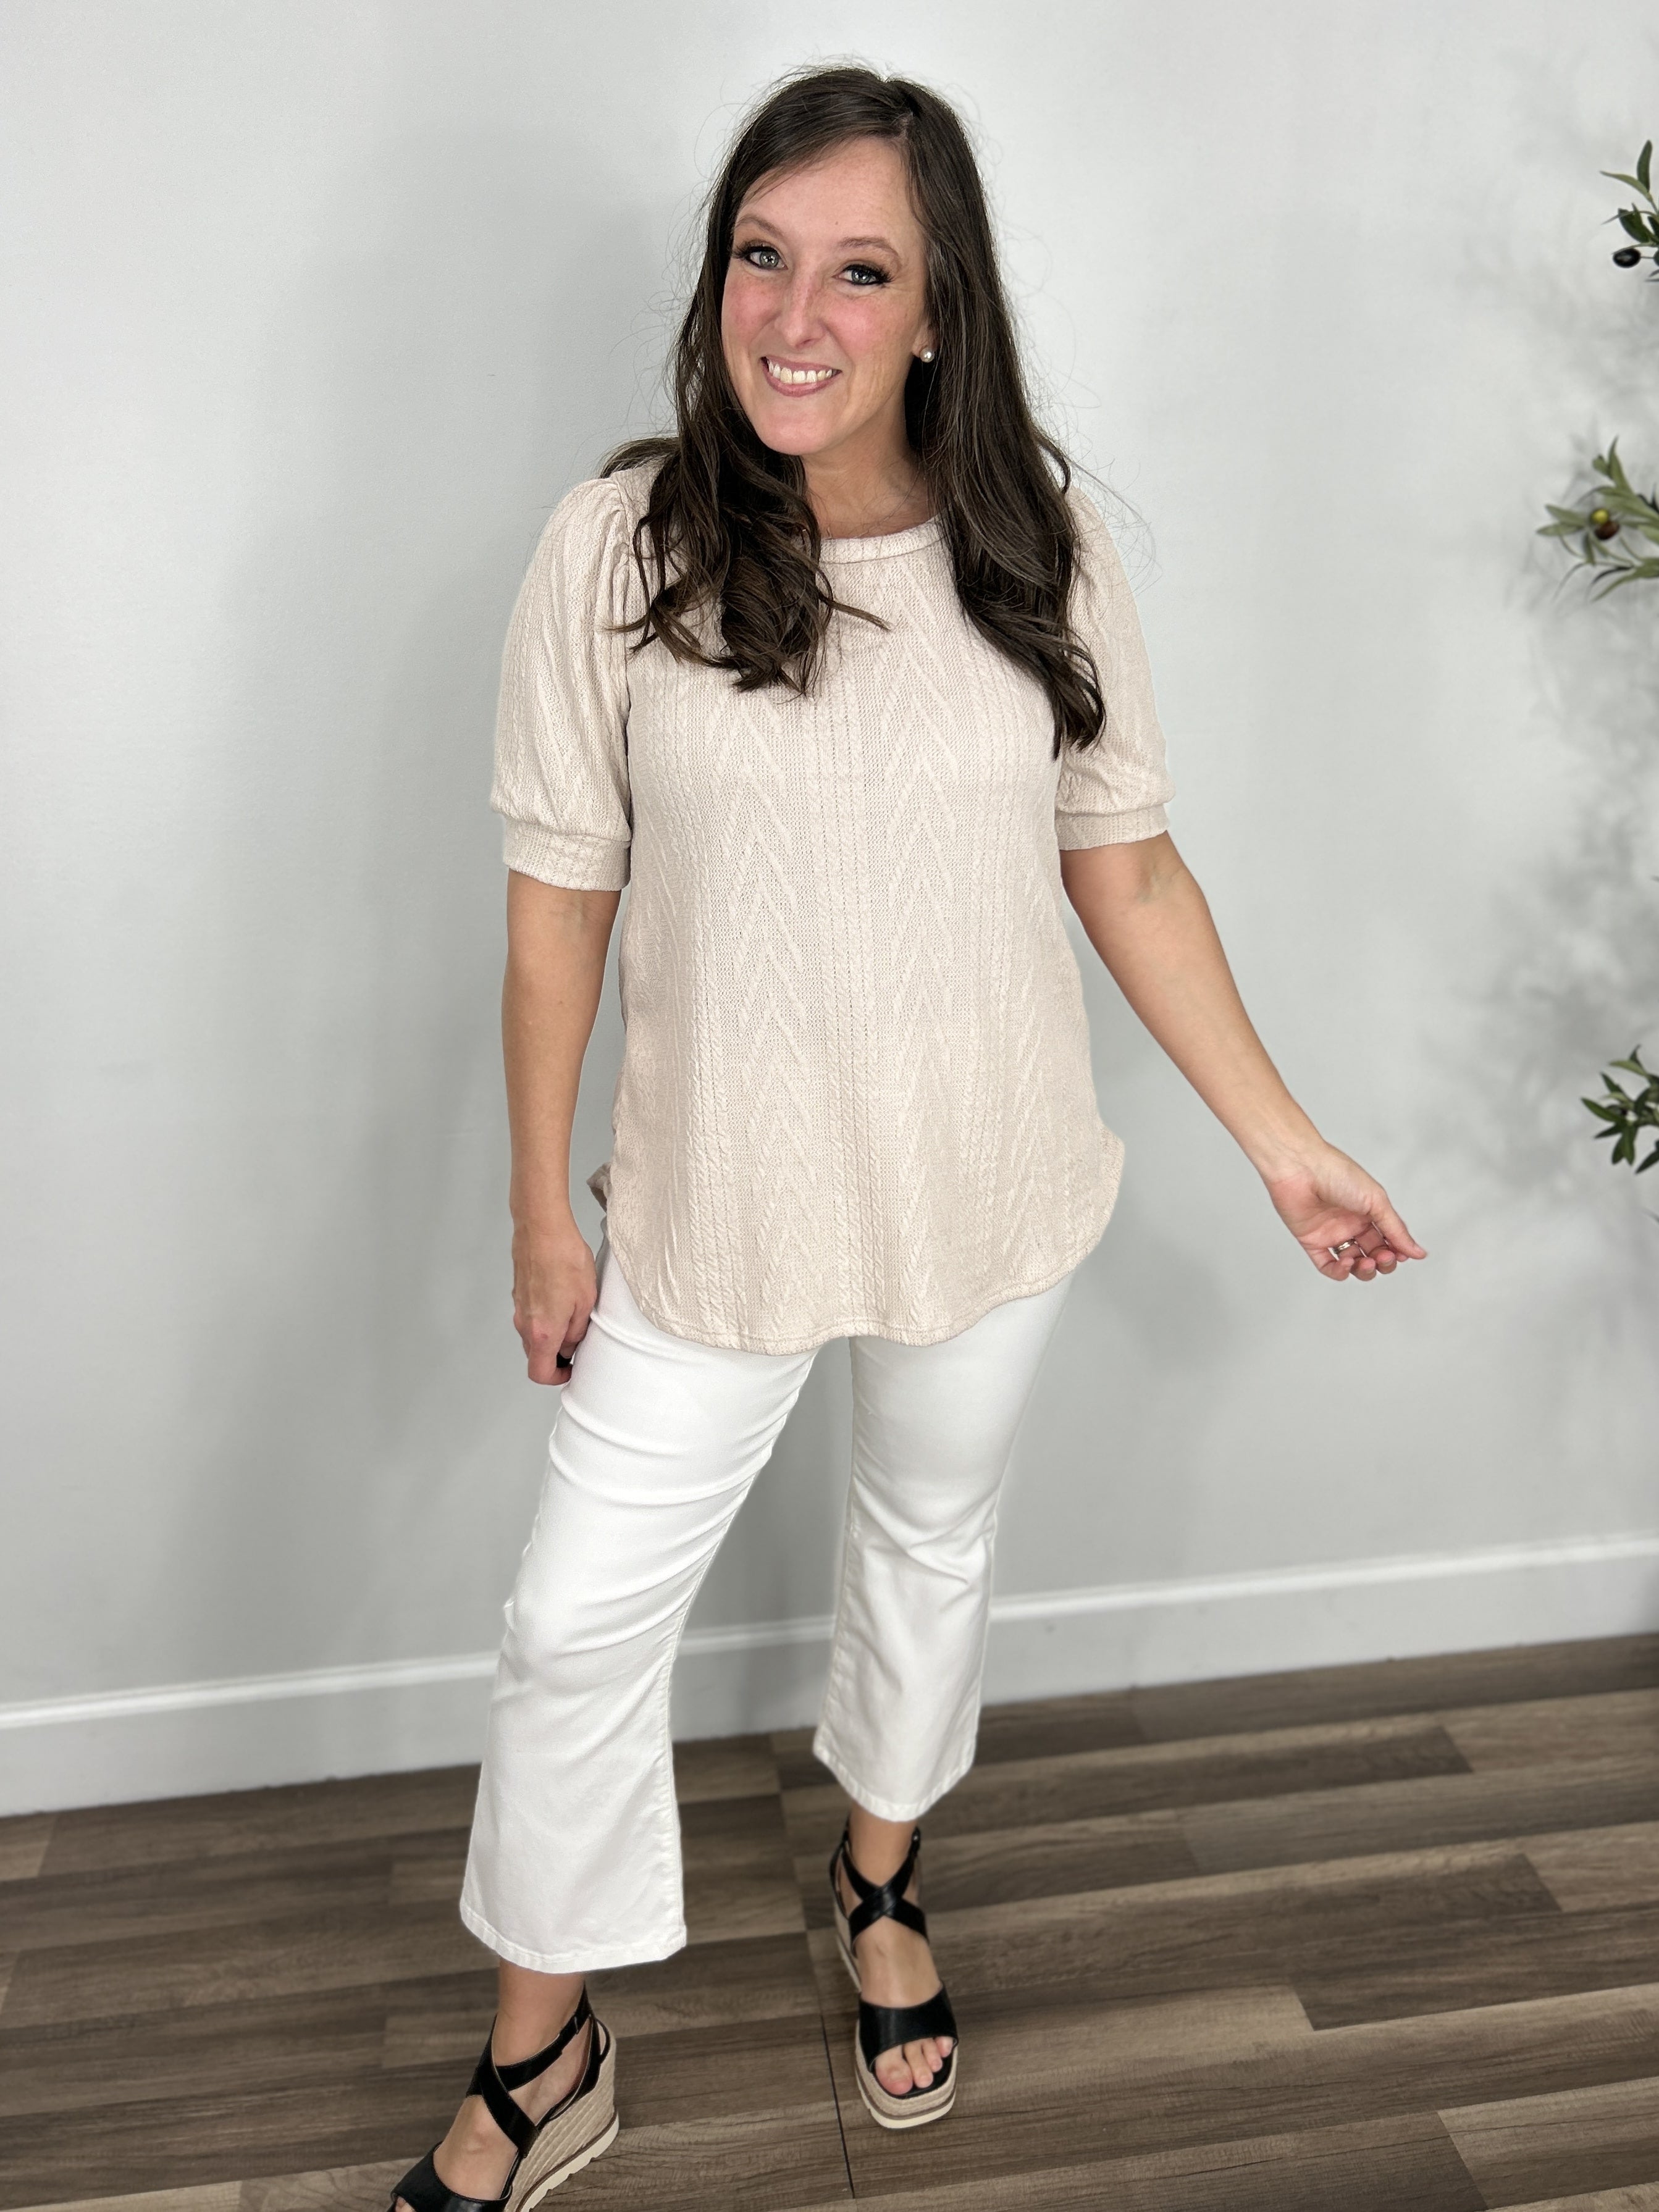 Women's oatmeal color short sleeve cable knit top paired with white crop flare pants and black wedge shoes.